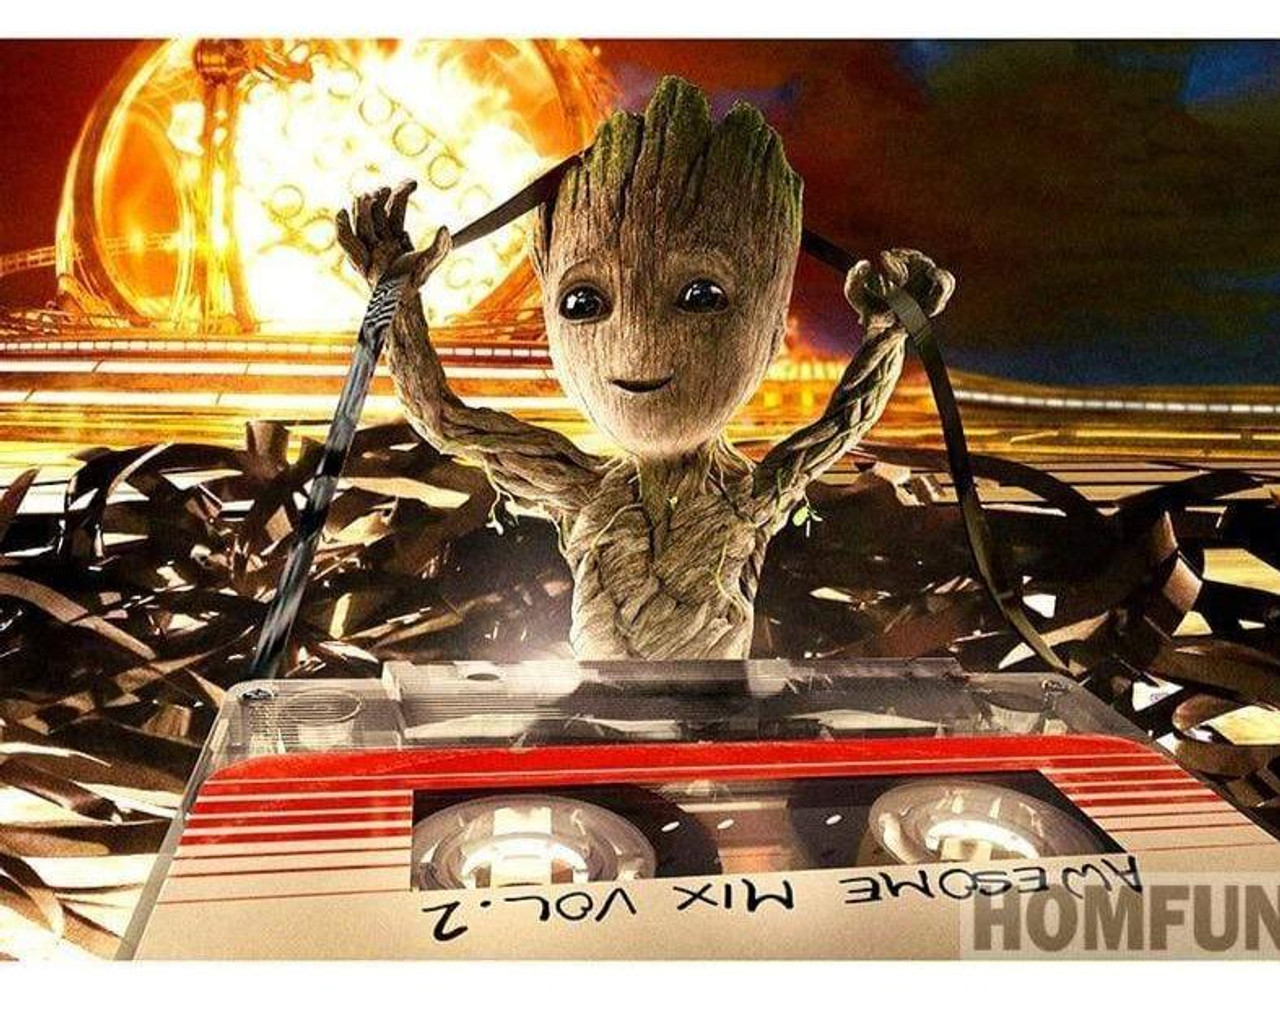  DIY 5D Diamond Painting Kits for Adults, Cute Groot Baby Groot  Sweet Groot Full Drill Diamond Embroidery Kit Home Office Wall Art Decor  Paint by Numbers 11.8x15.7 inches : Arts, Crafts